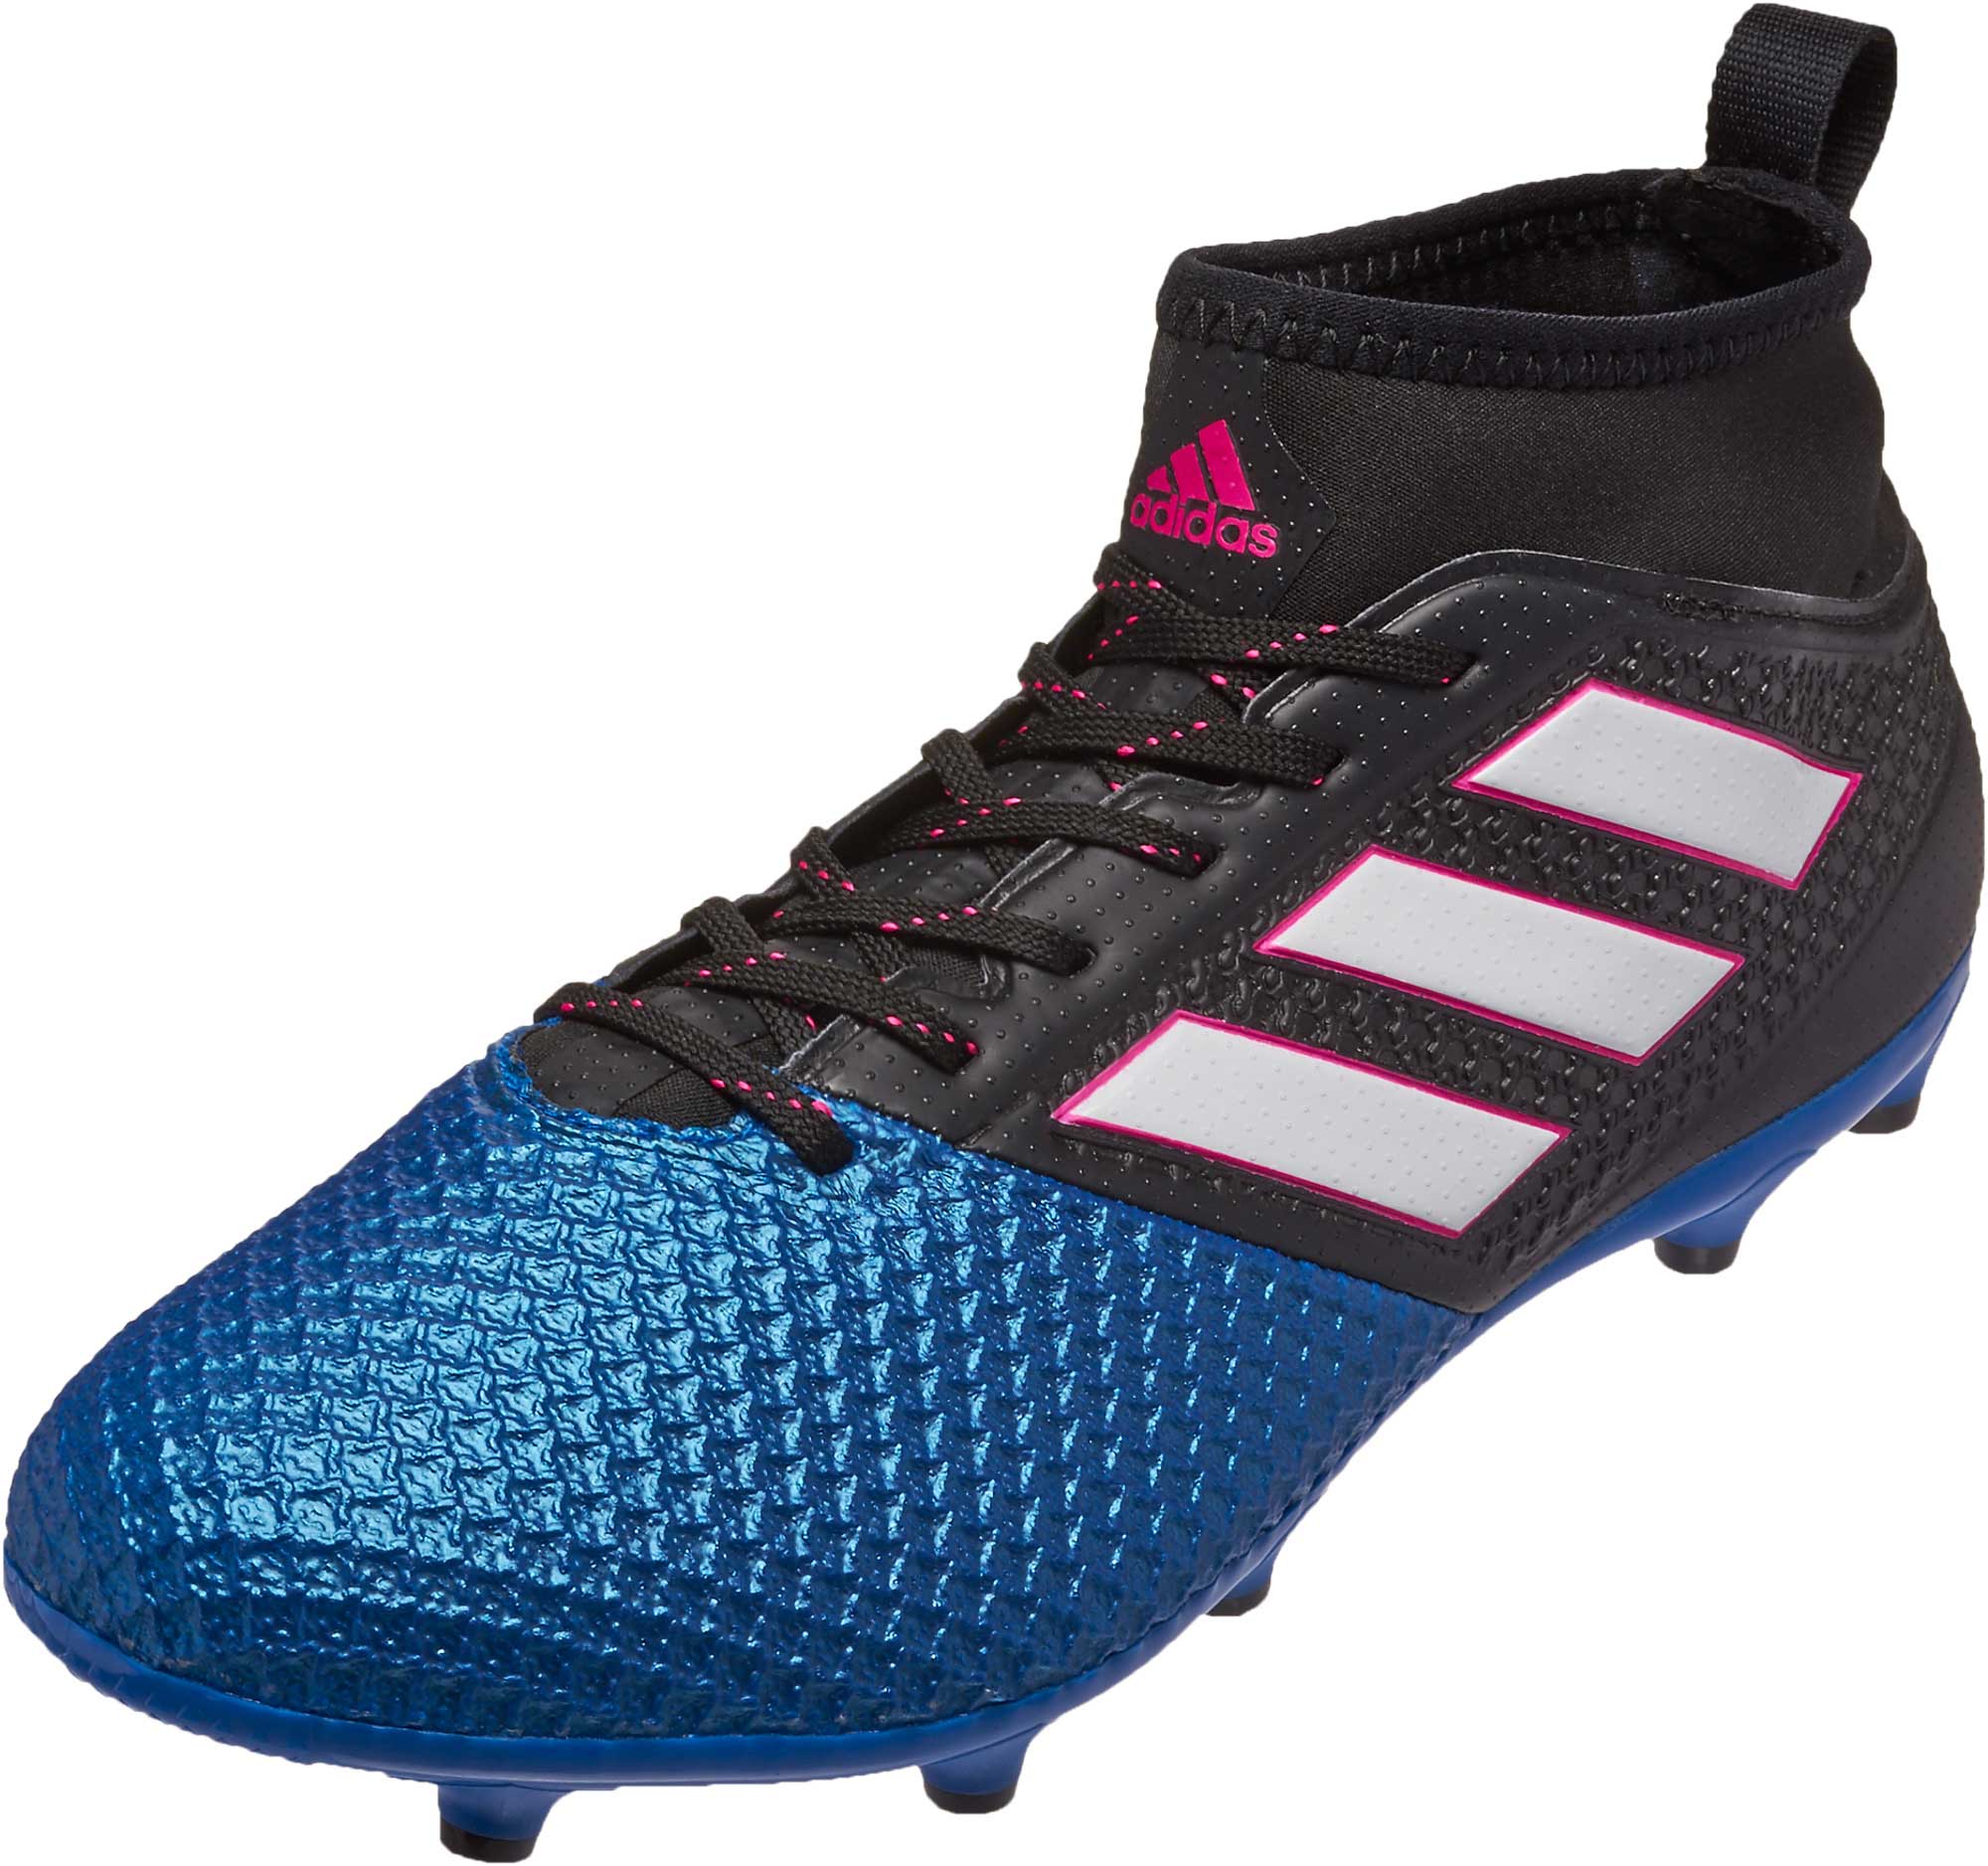 adidas ace 17.3 in